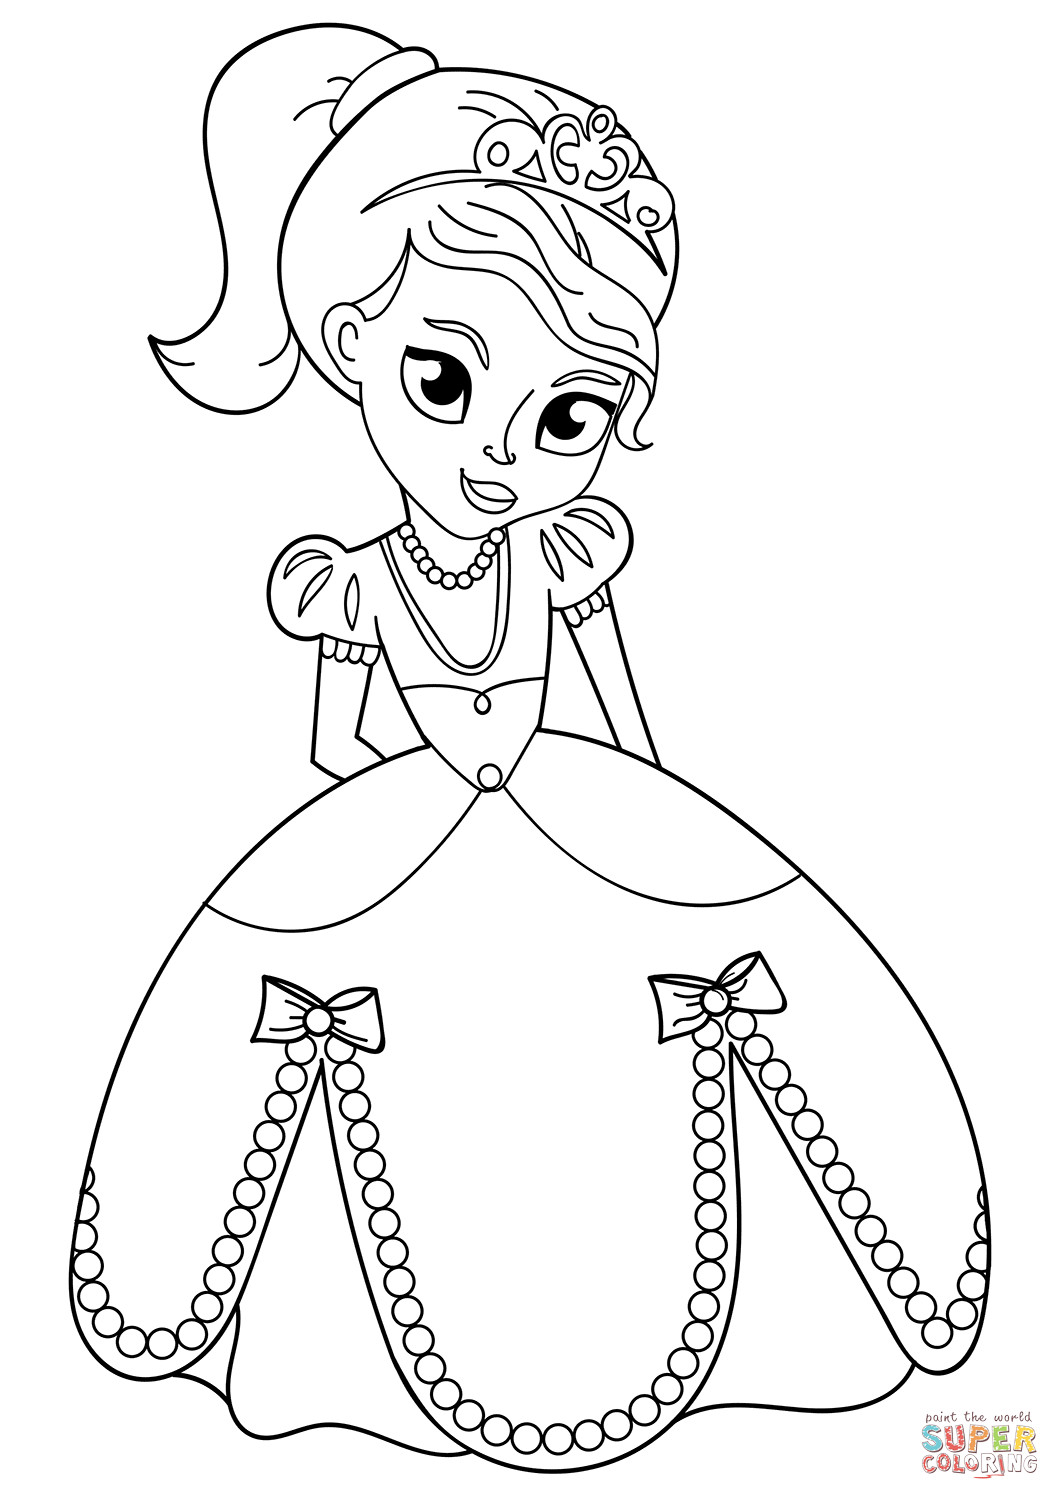 Baby Princesses Coloring Pages
 Cute Princess coloring page